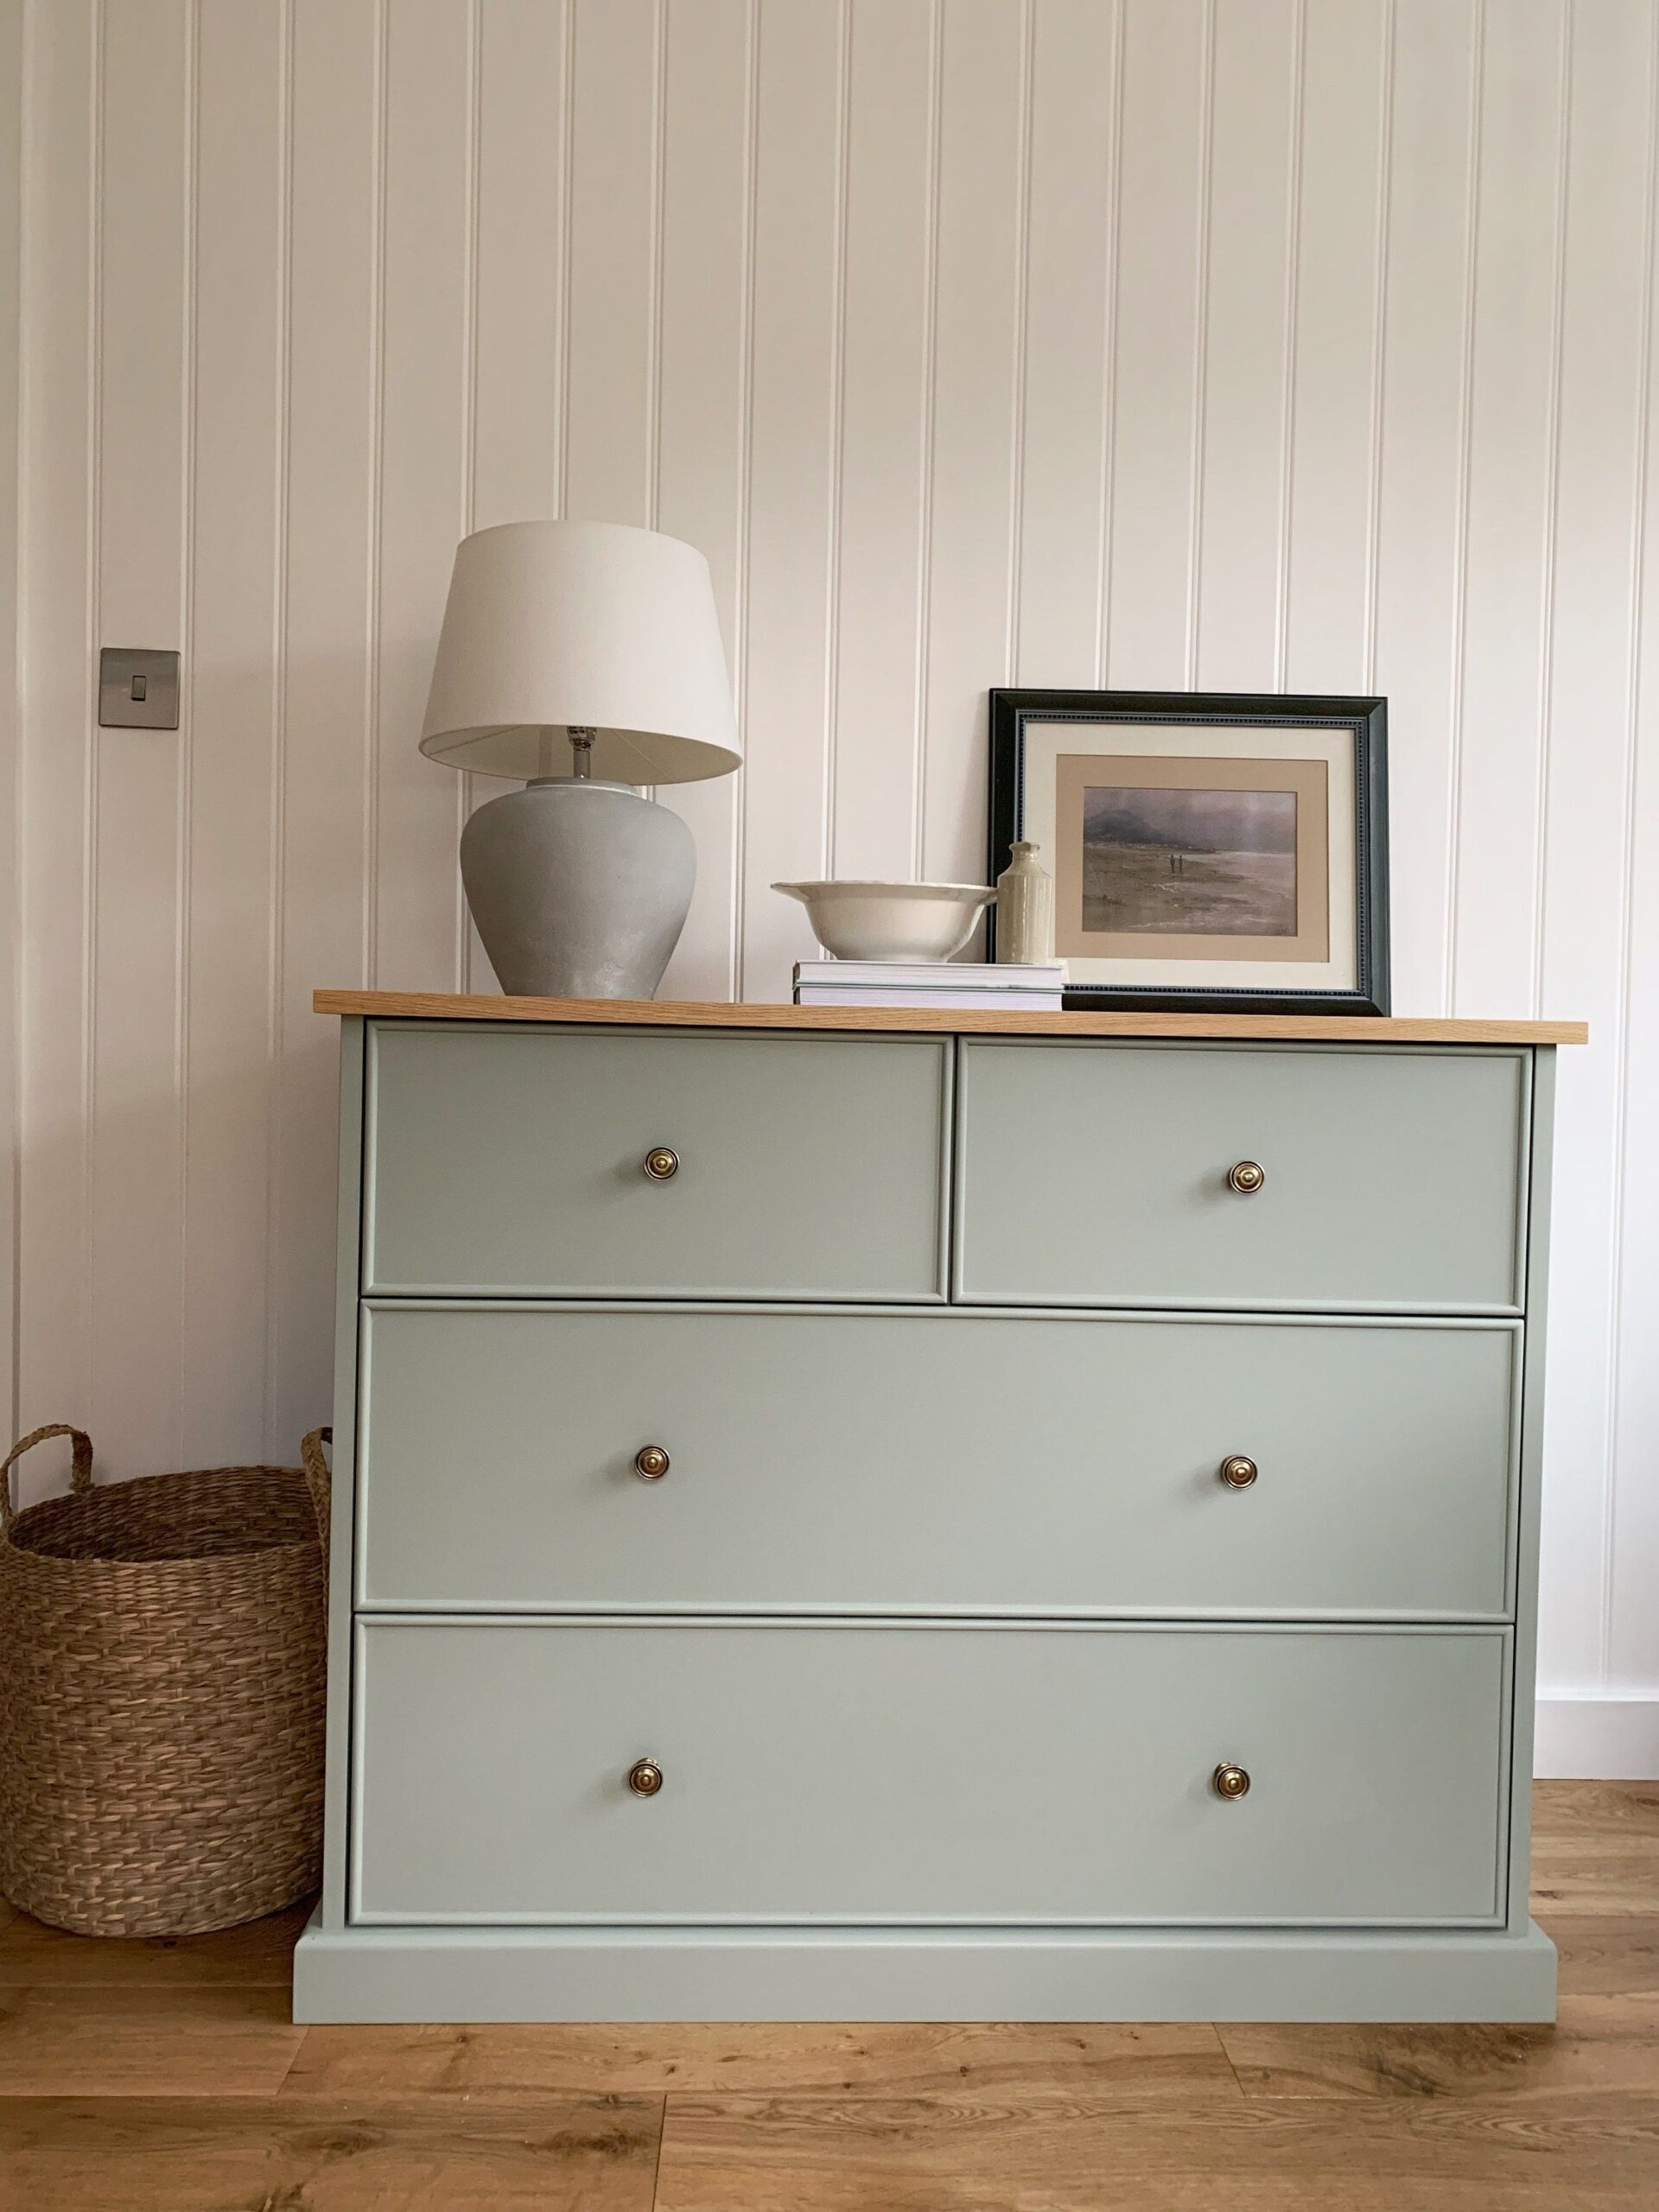 Chest Of Drawers For Room Elegant Storage Option for Bedrooms – Declutter with a Stylish Drawer Unit